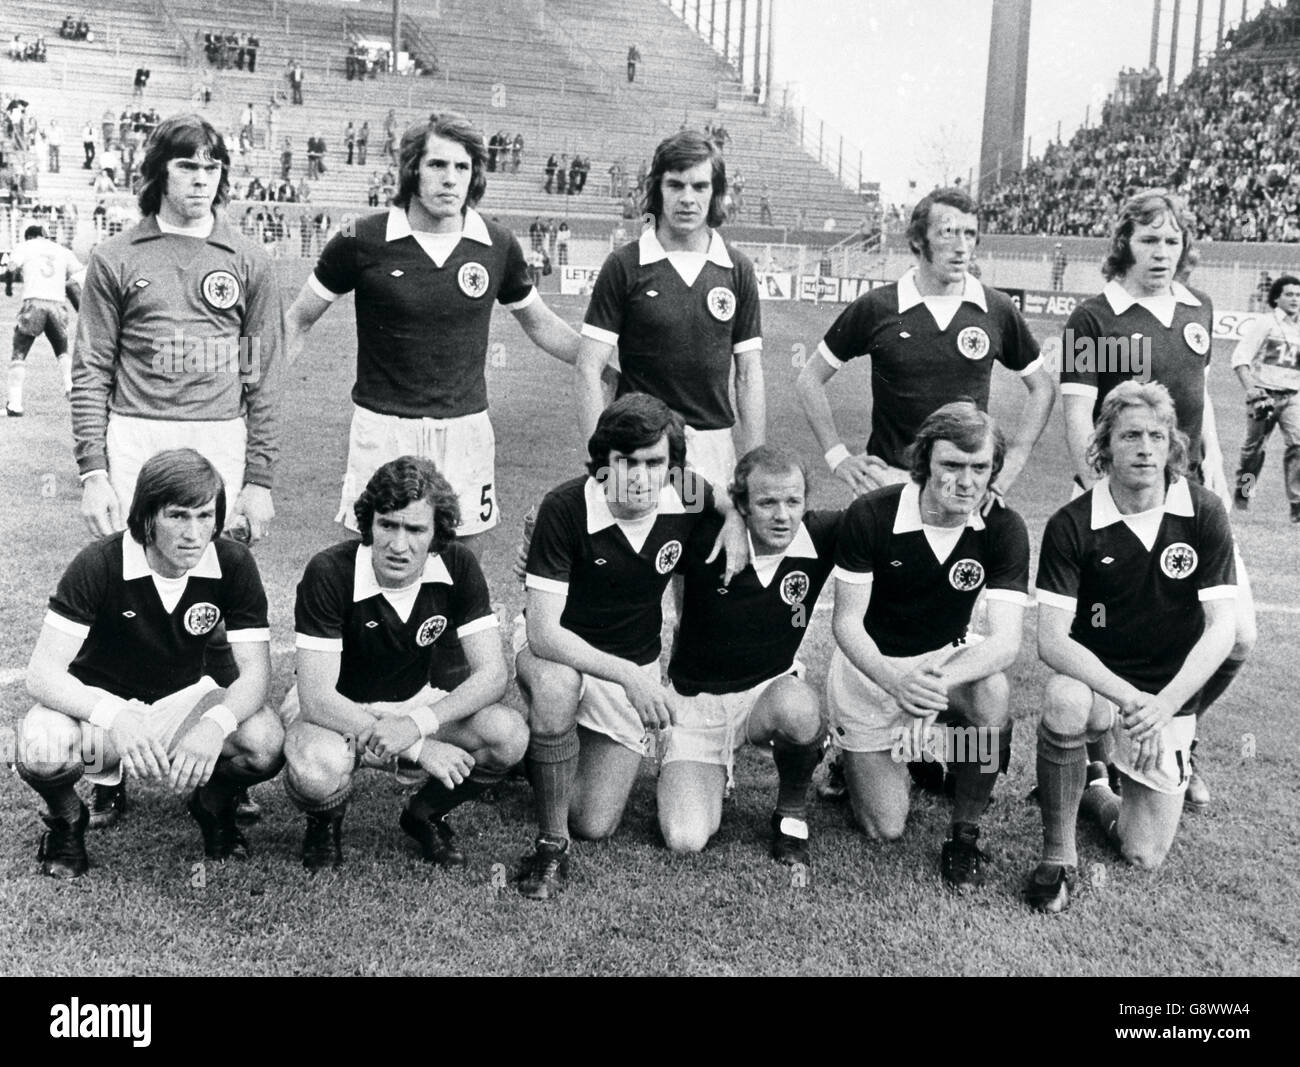 The Scottish team before beating Zaire by two goals to nil in the group 2 World Cup match at Dortmund's Westfalen Stadium. Back row - from left; David Harvey, Jim Holton, Joe Jordan, Danny McGrain and John Blackley. Front row - from left; Kenny Dalglish, Sandy Jardine, Peter Lorimer, Billy Bremner, David Hay and Denis Law. Stock Photo